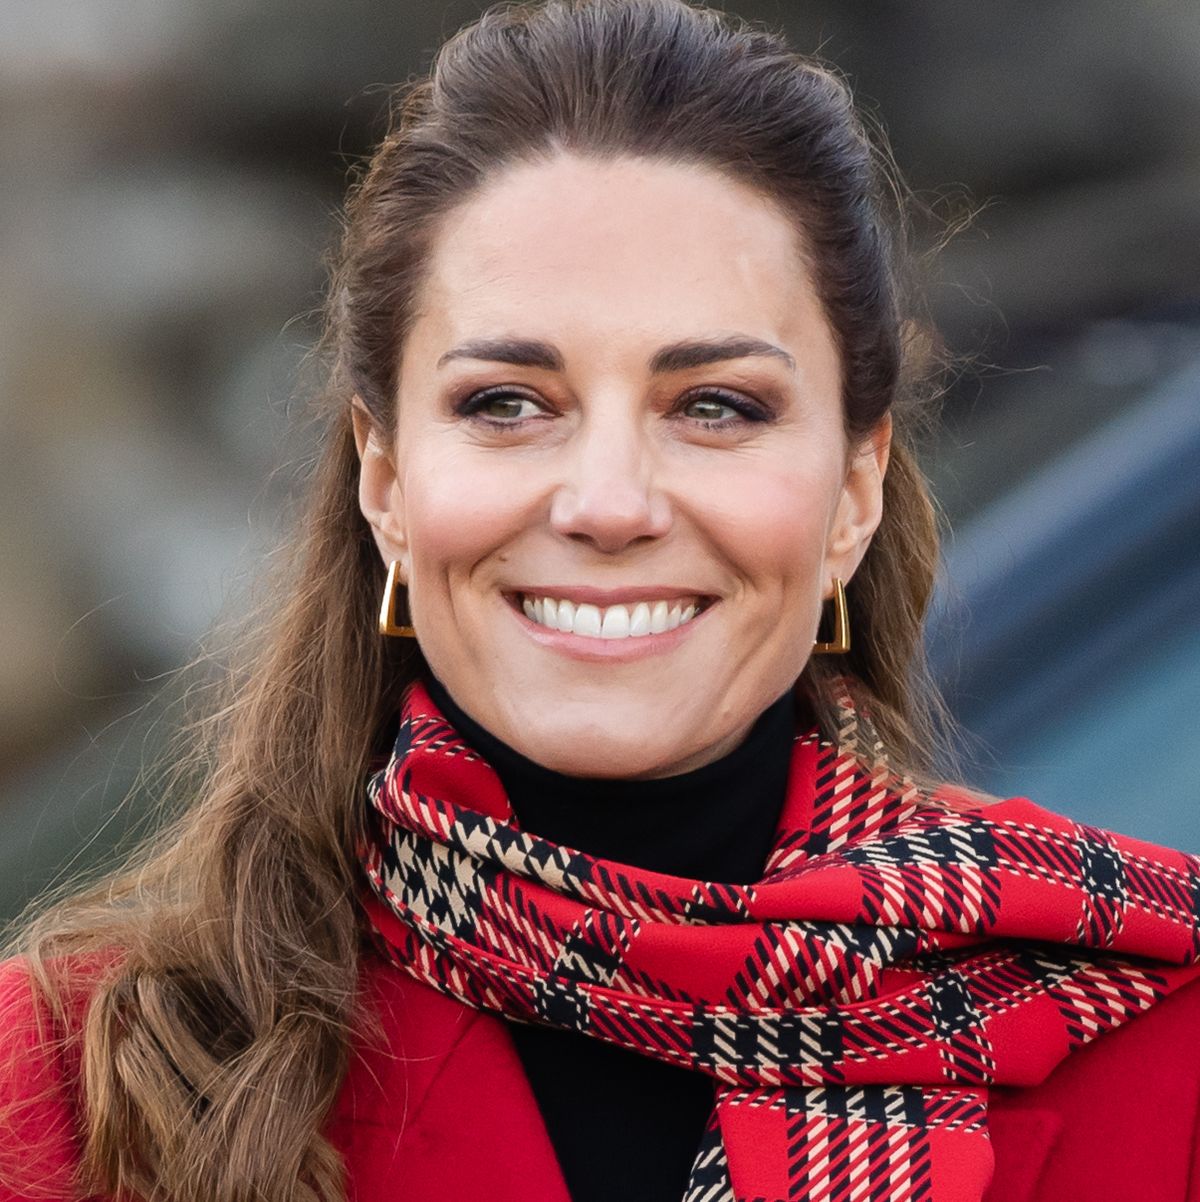 cardiff, wales   december 08 catherine, duchess of cambridge during a visit to cardiff castle with prince william, duke of cambridge on december 08, 2020 in cardiff, wales photo by samir husseinwireimage